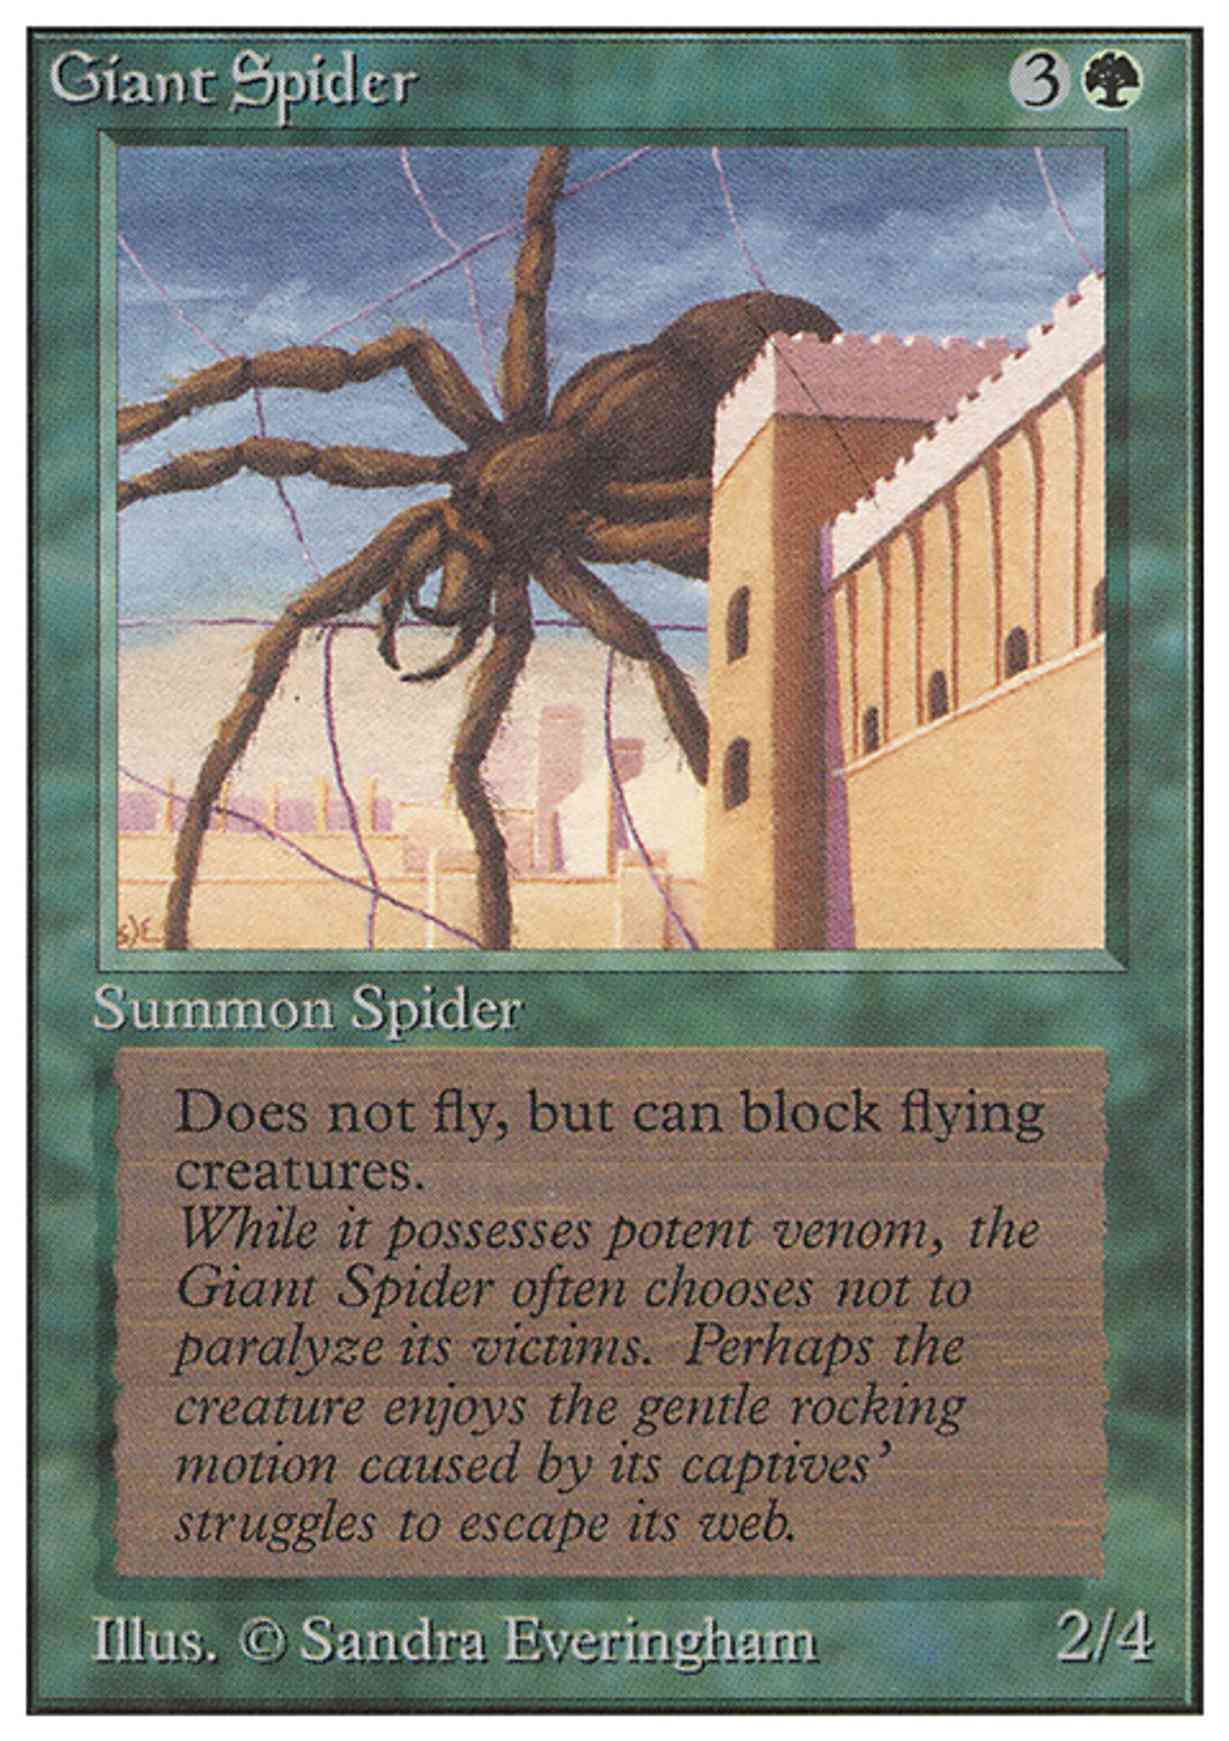 Giant Spider magic card front